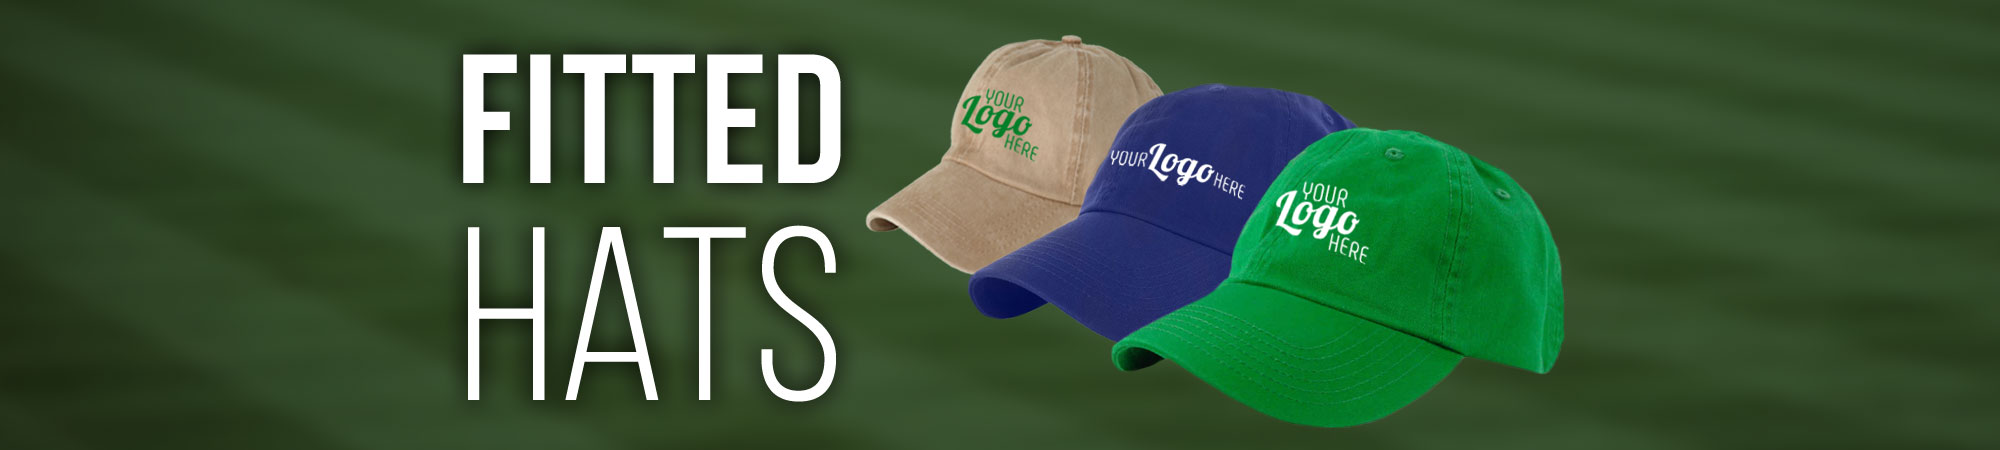 fitted-hats-banner